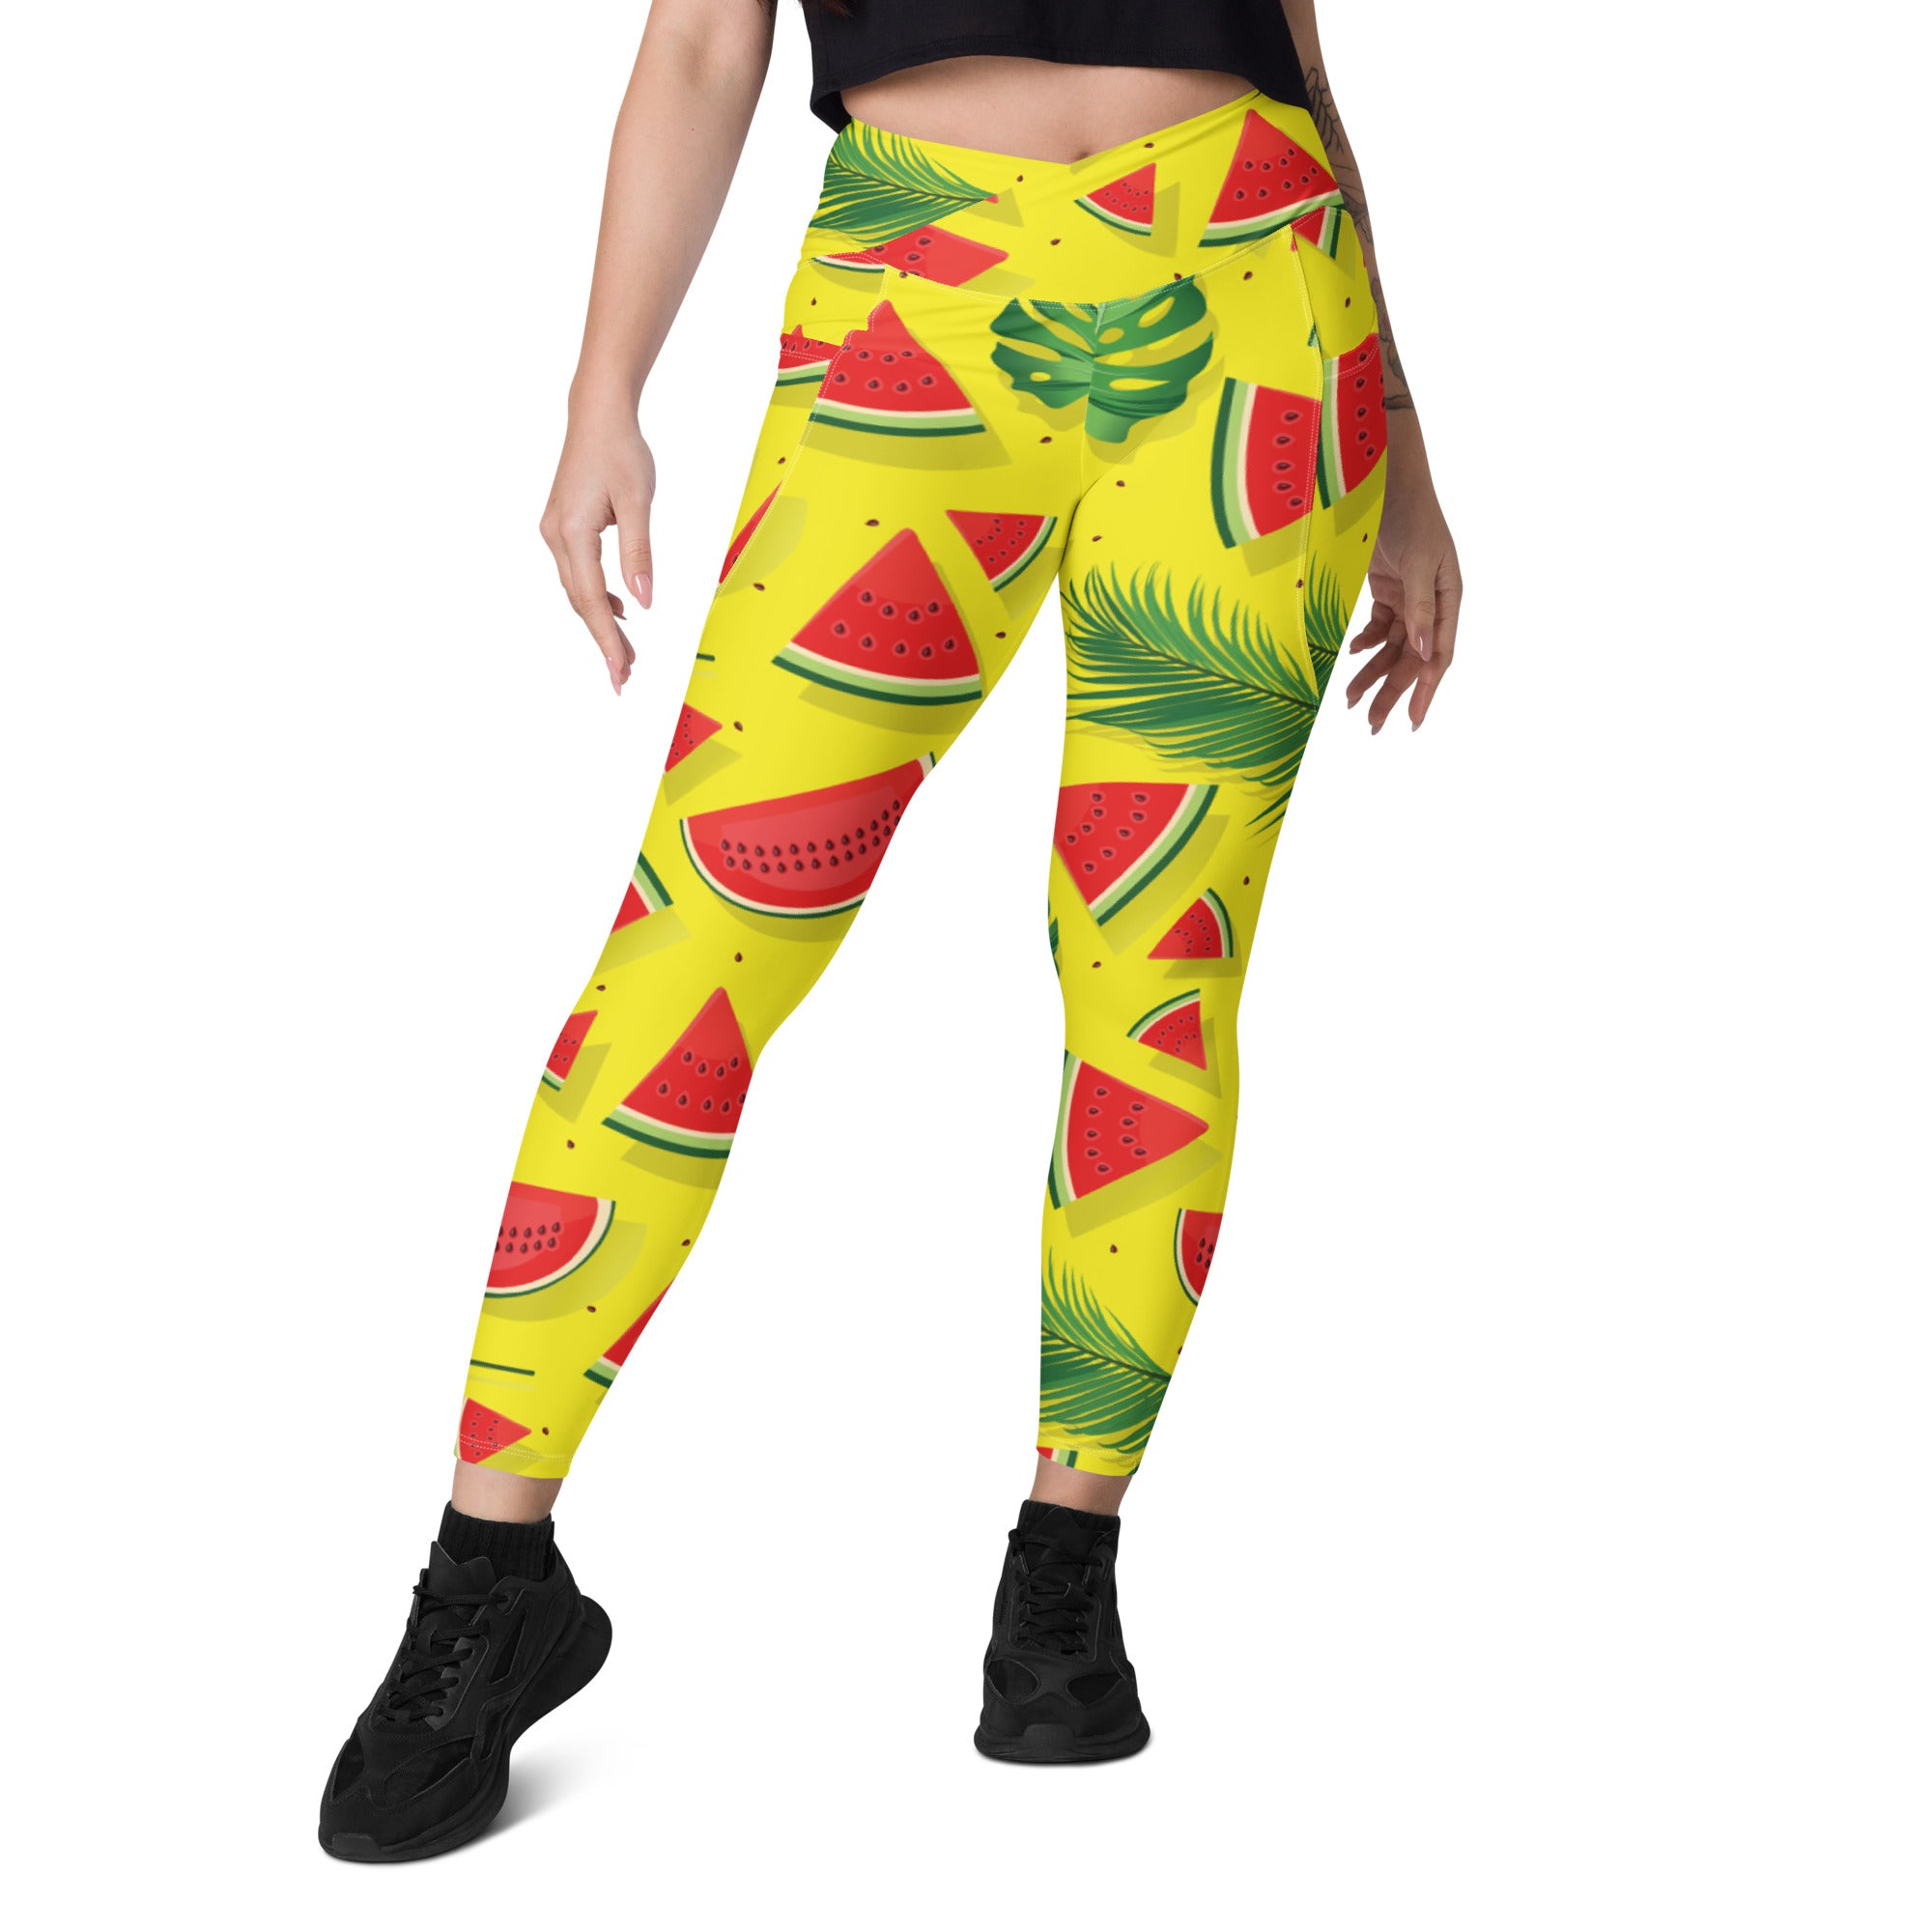 Watermelon Crossover leggings with pockets